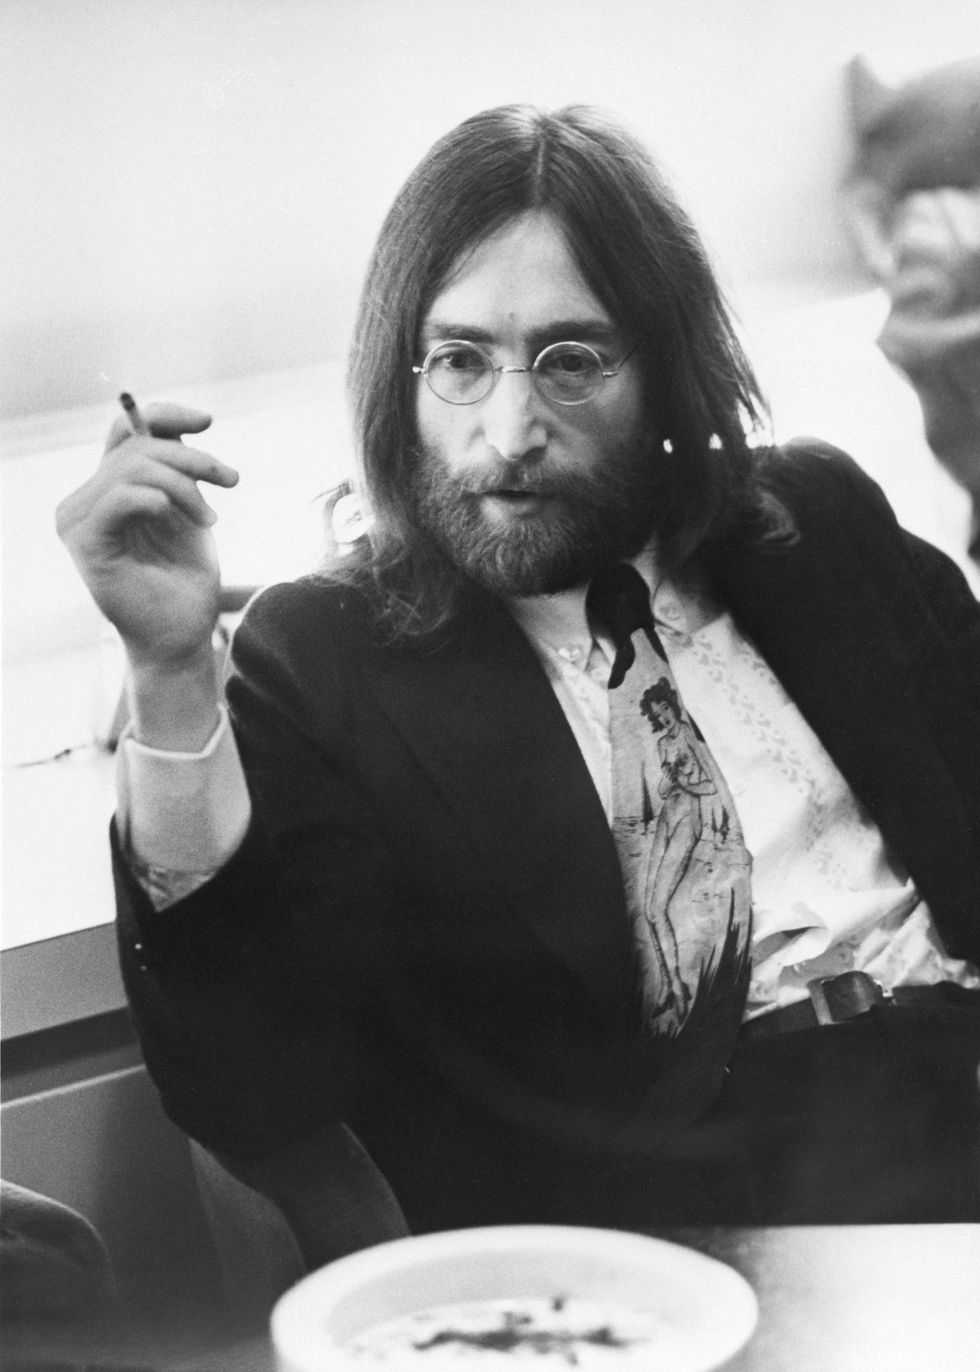 musician john lennon of the beatles relaxing with a cigarette